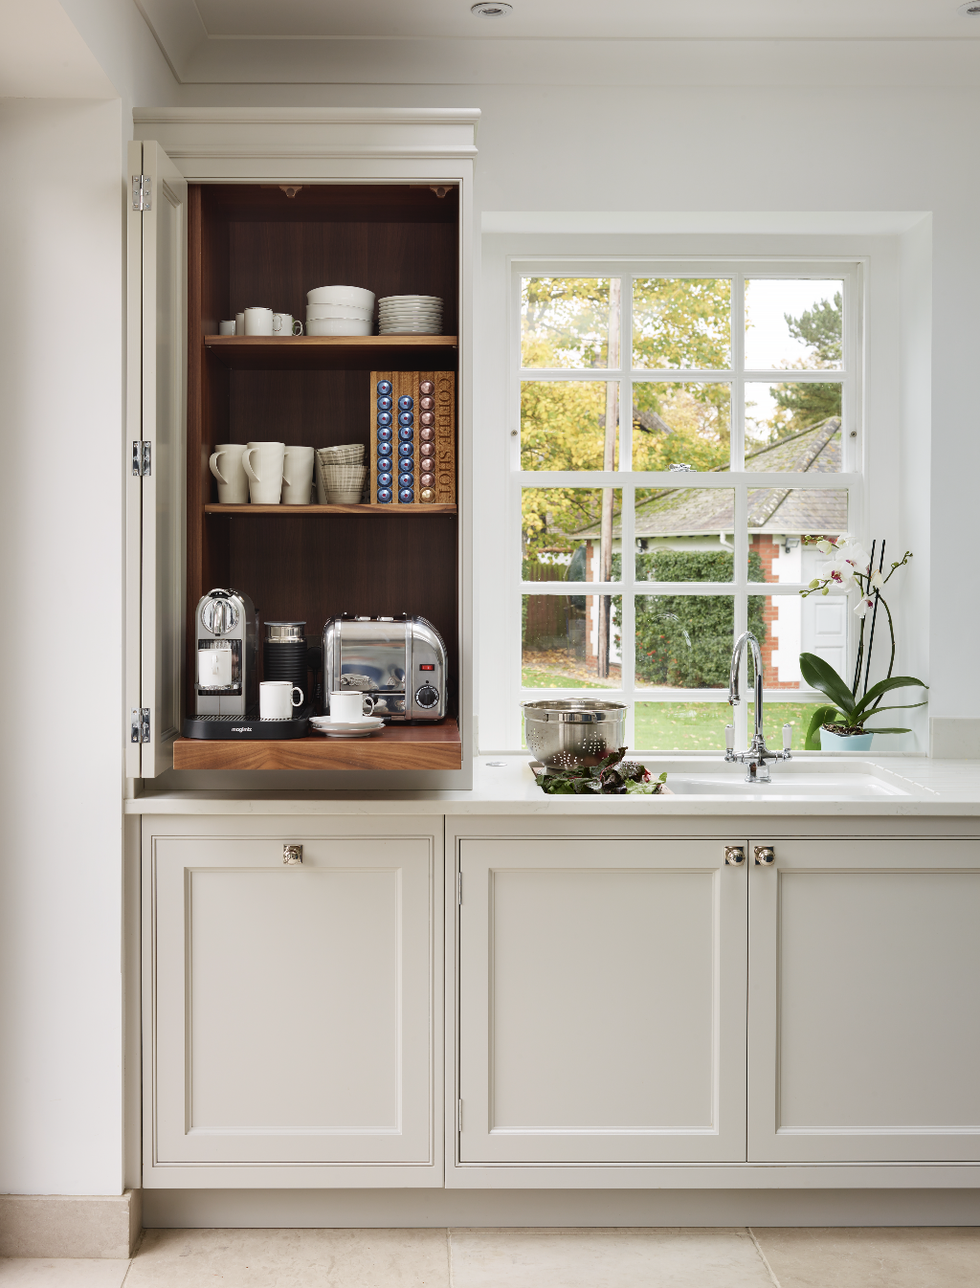 DISCOVER THE SECRET TO AN ORGANIZED KITCHEN WITH TOP CABINET